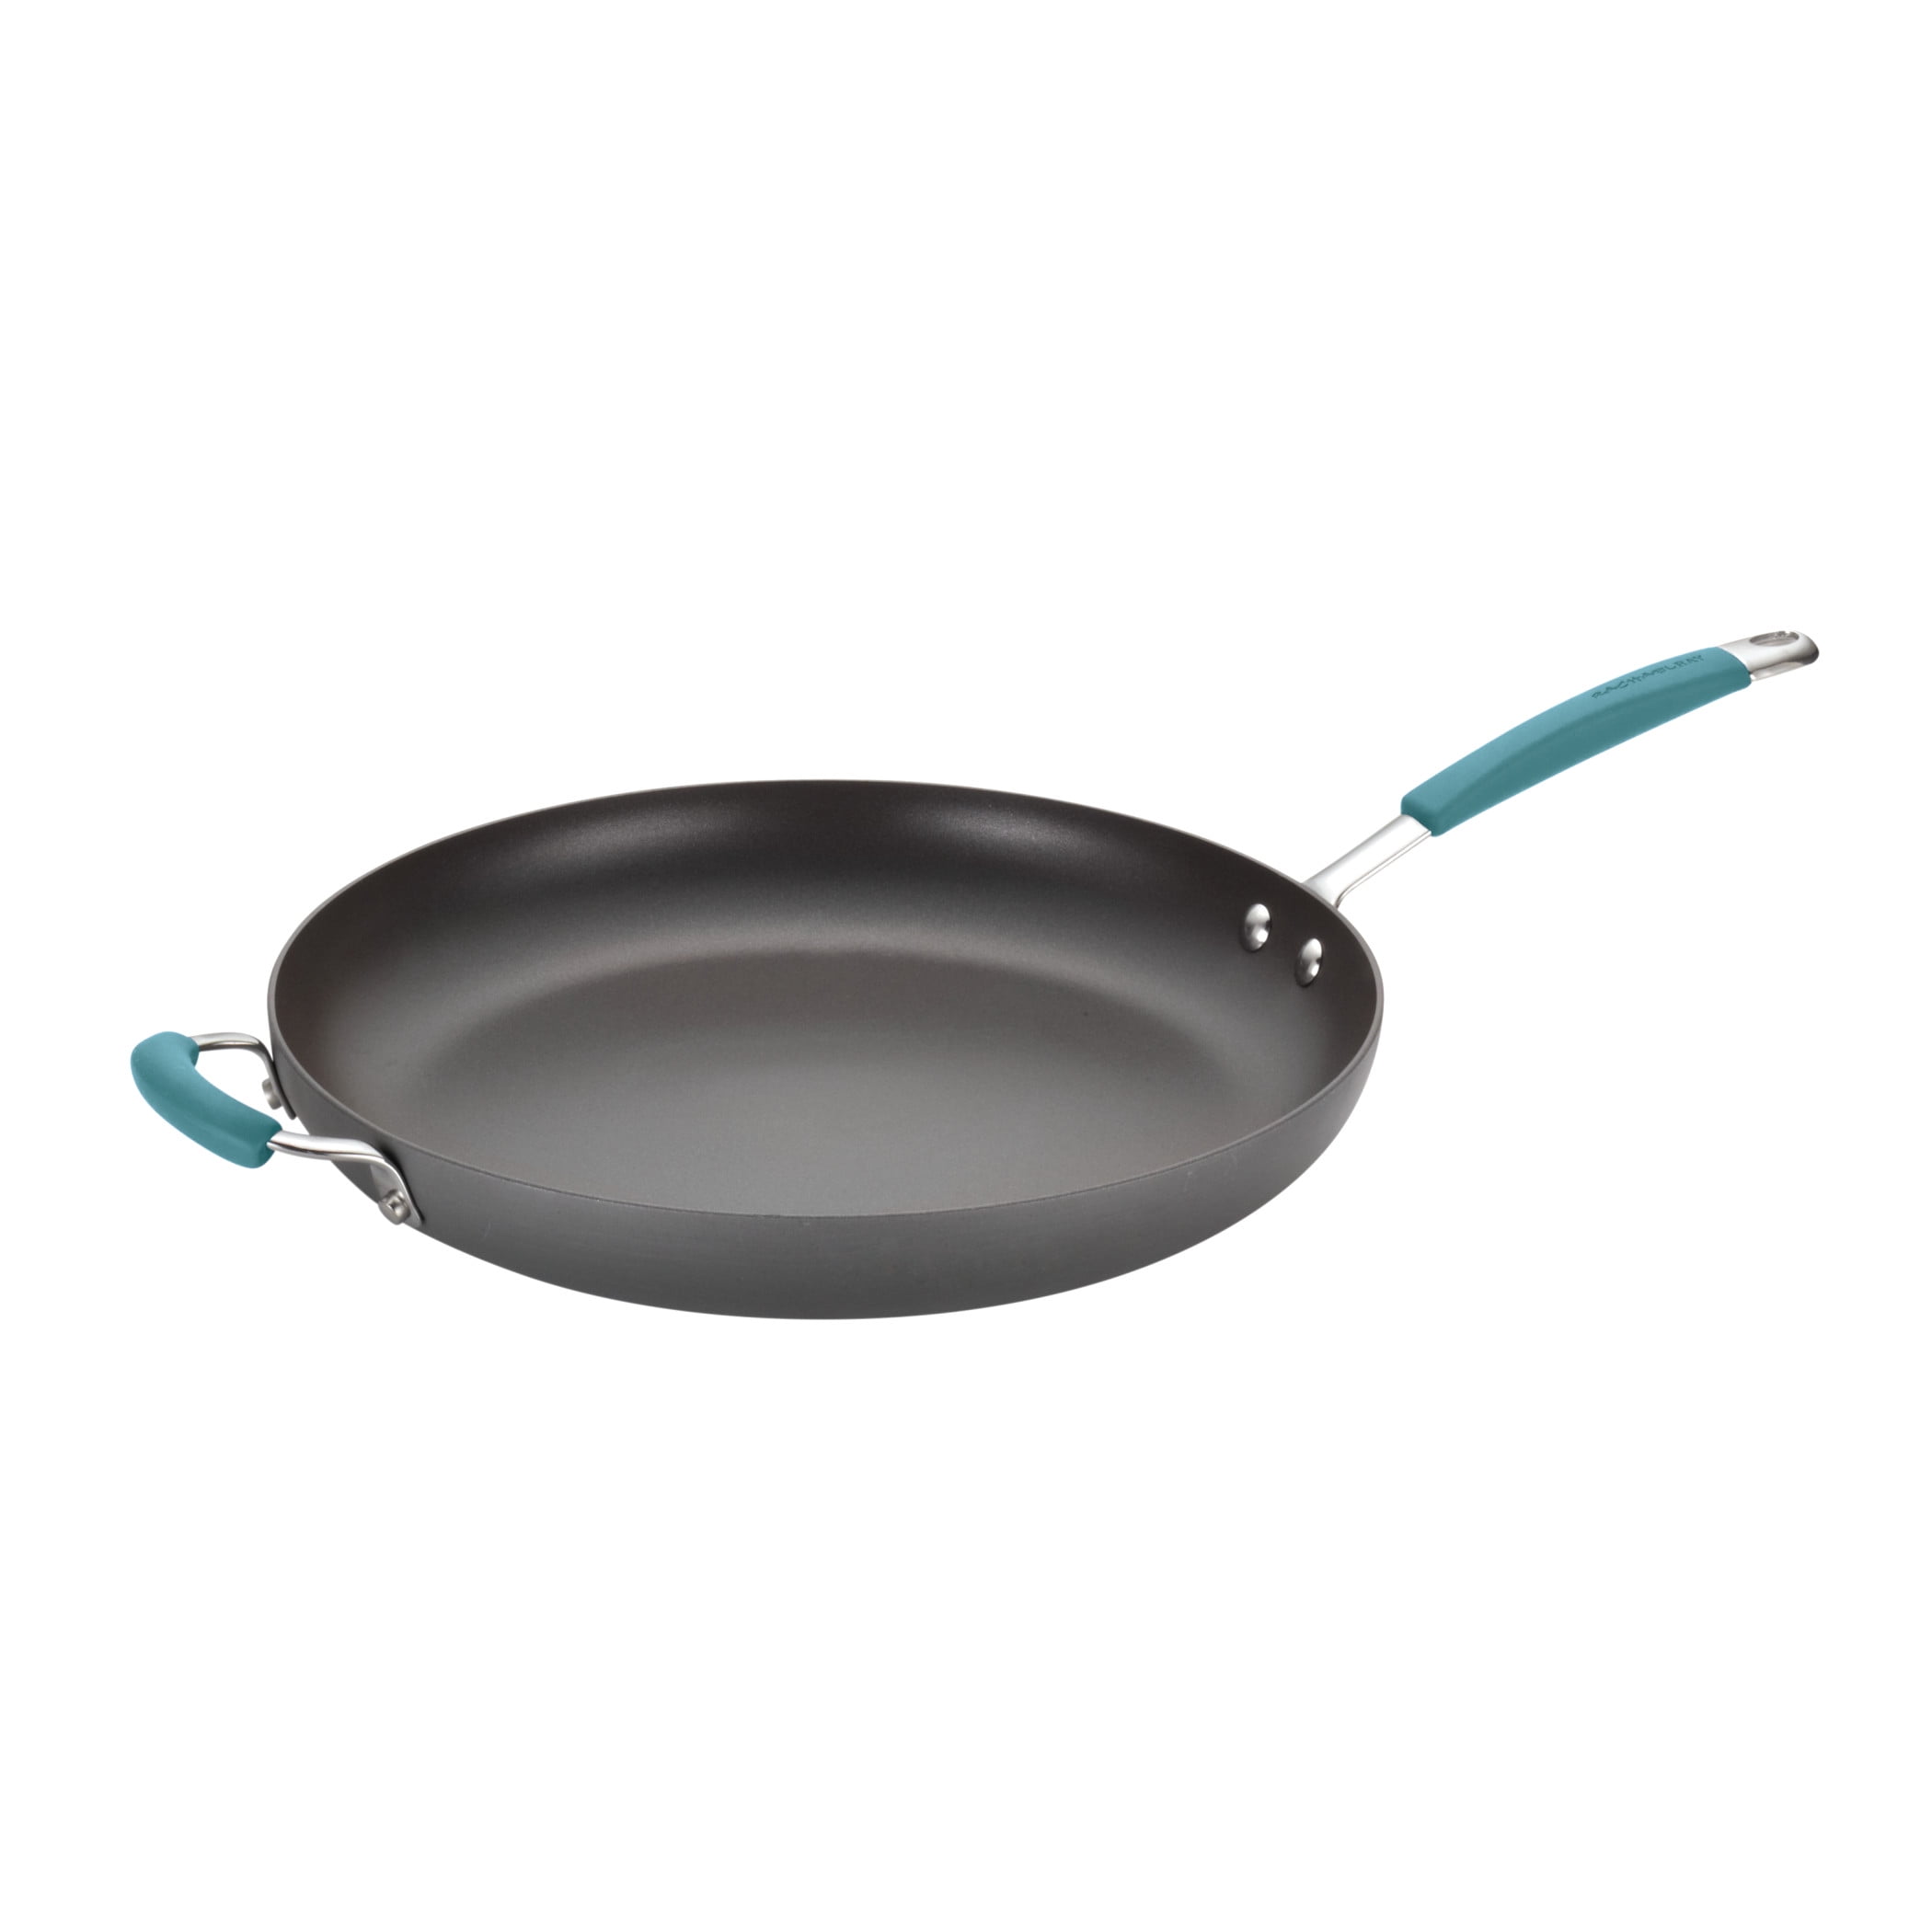 Gray/Agave Blue 9.25-Inch and 11.5-Inch Rachael Ray Cucina Hard-Anodized Aluminum Nonstick Skillet Set 